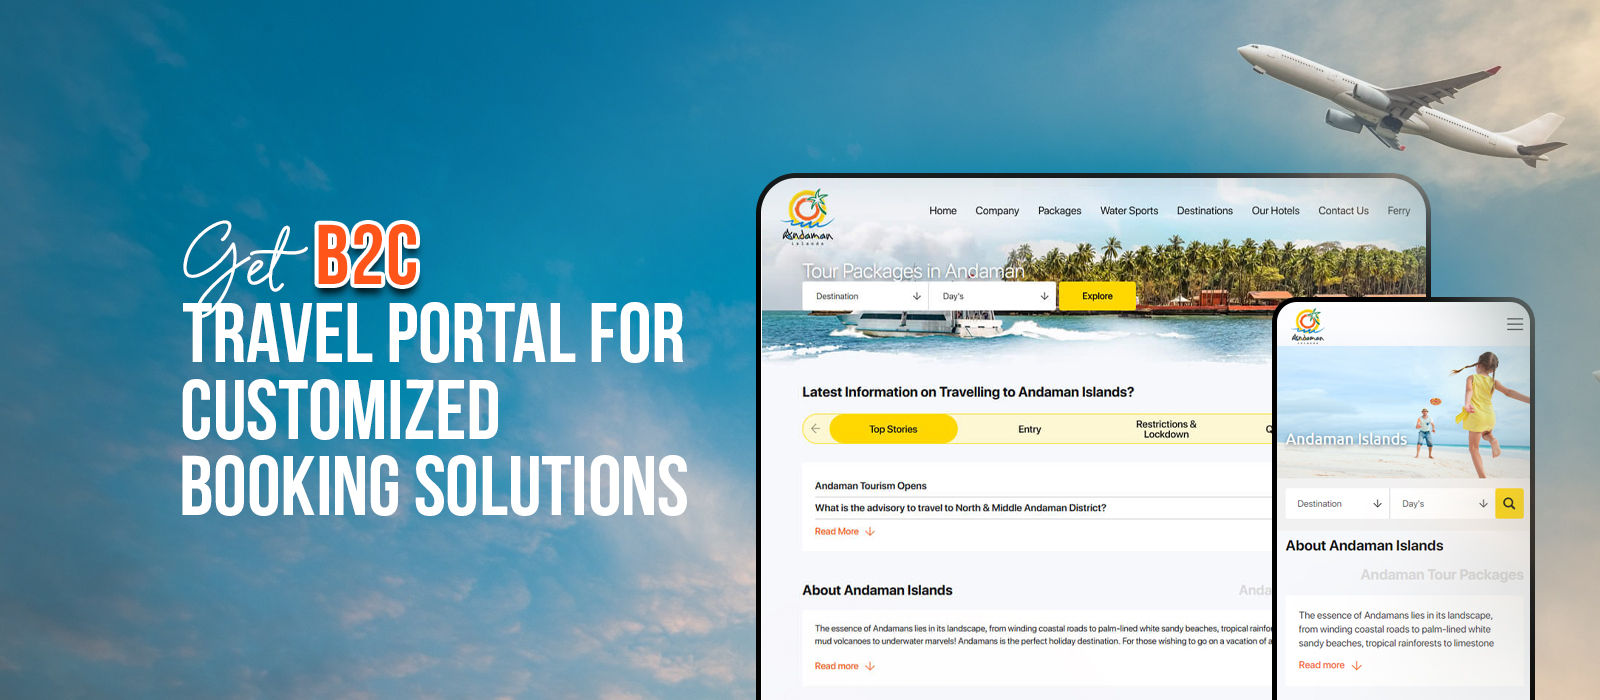 Get a B2C Travel Portal For Customized Booking Solutions – With Advanced Features